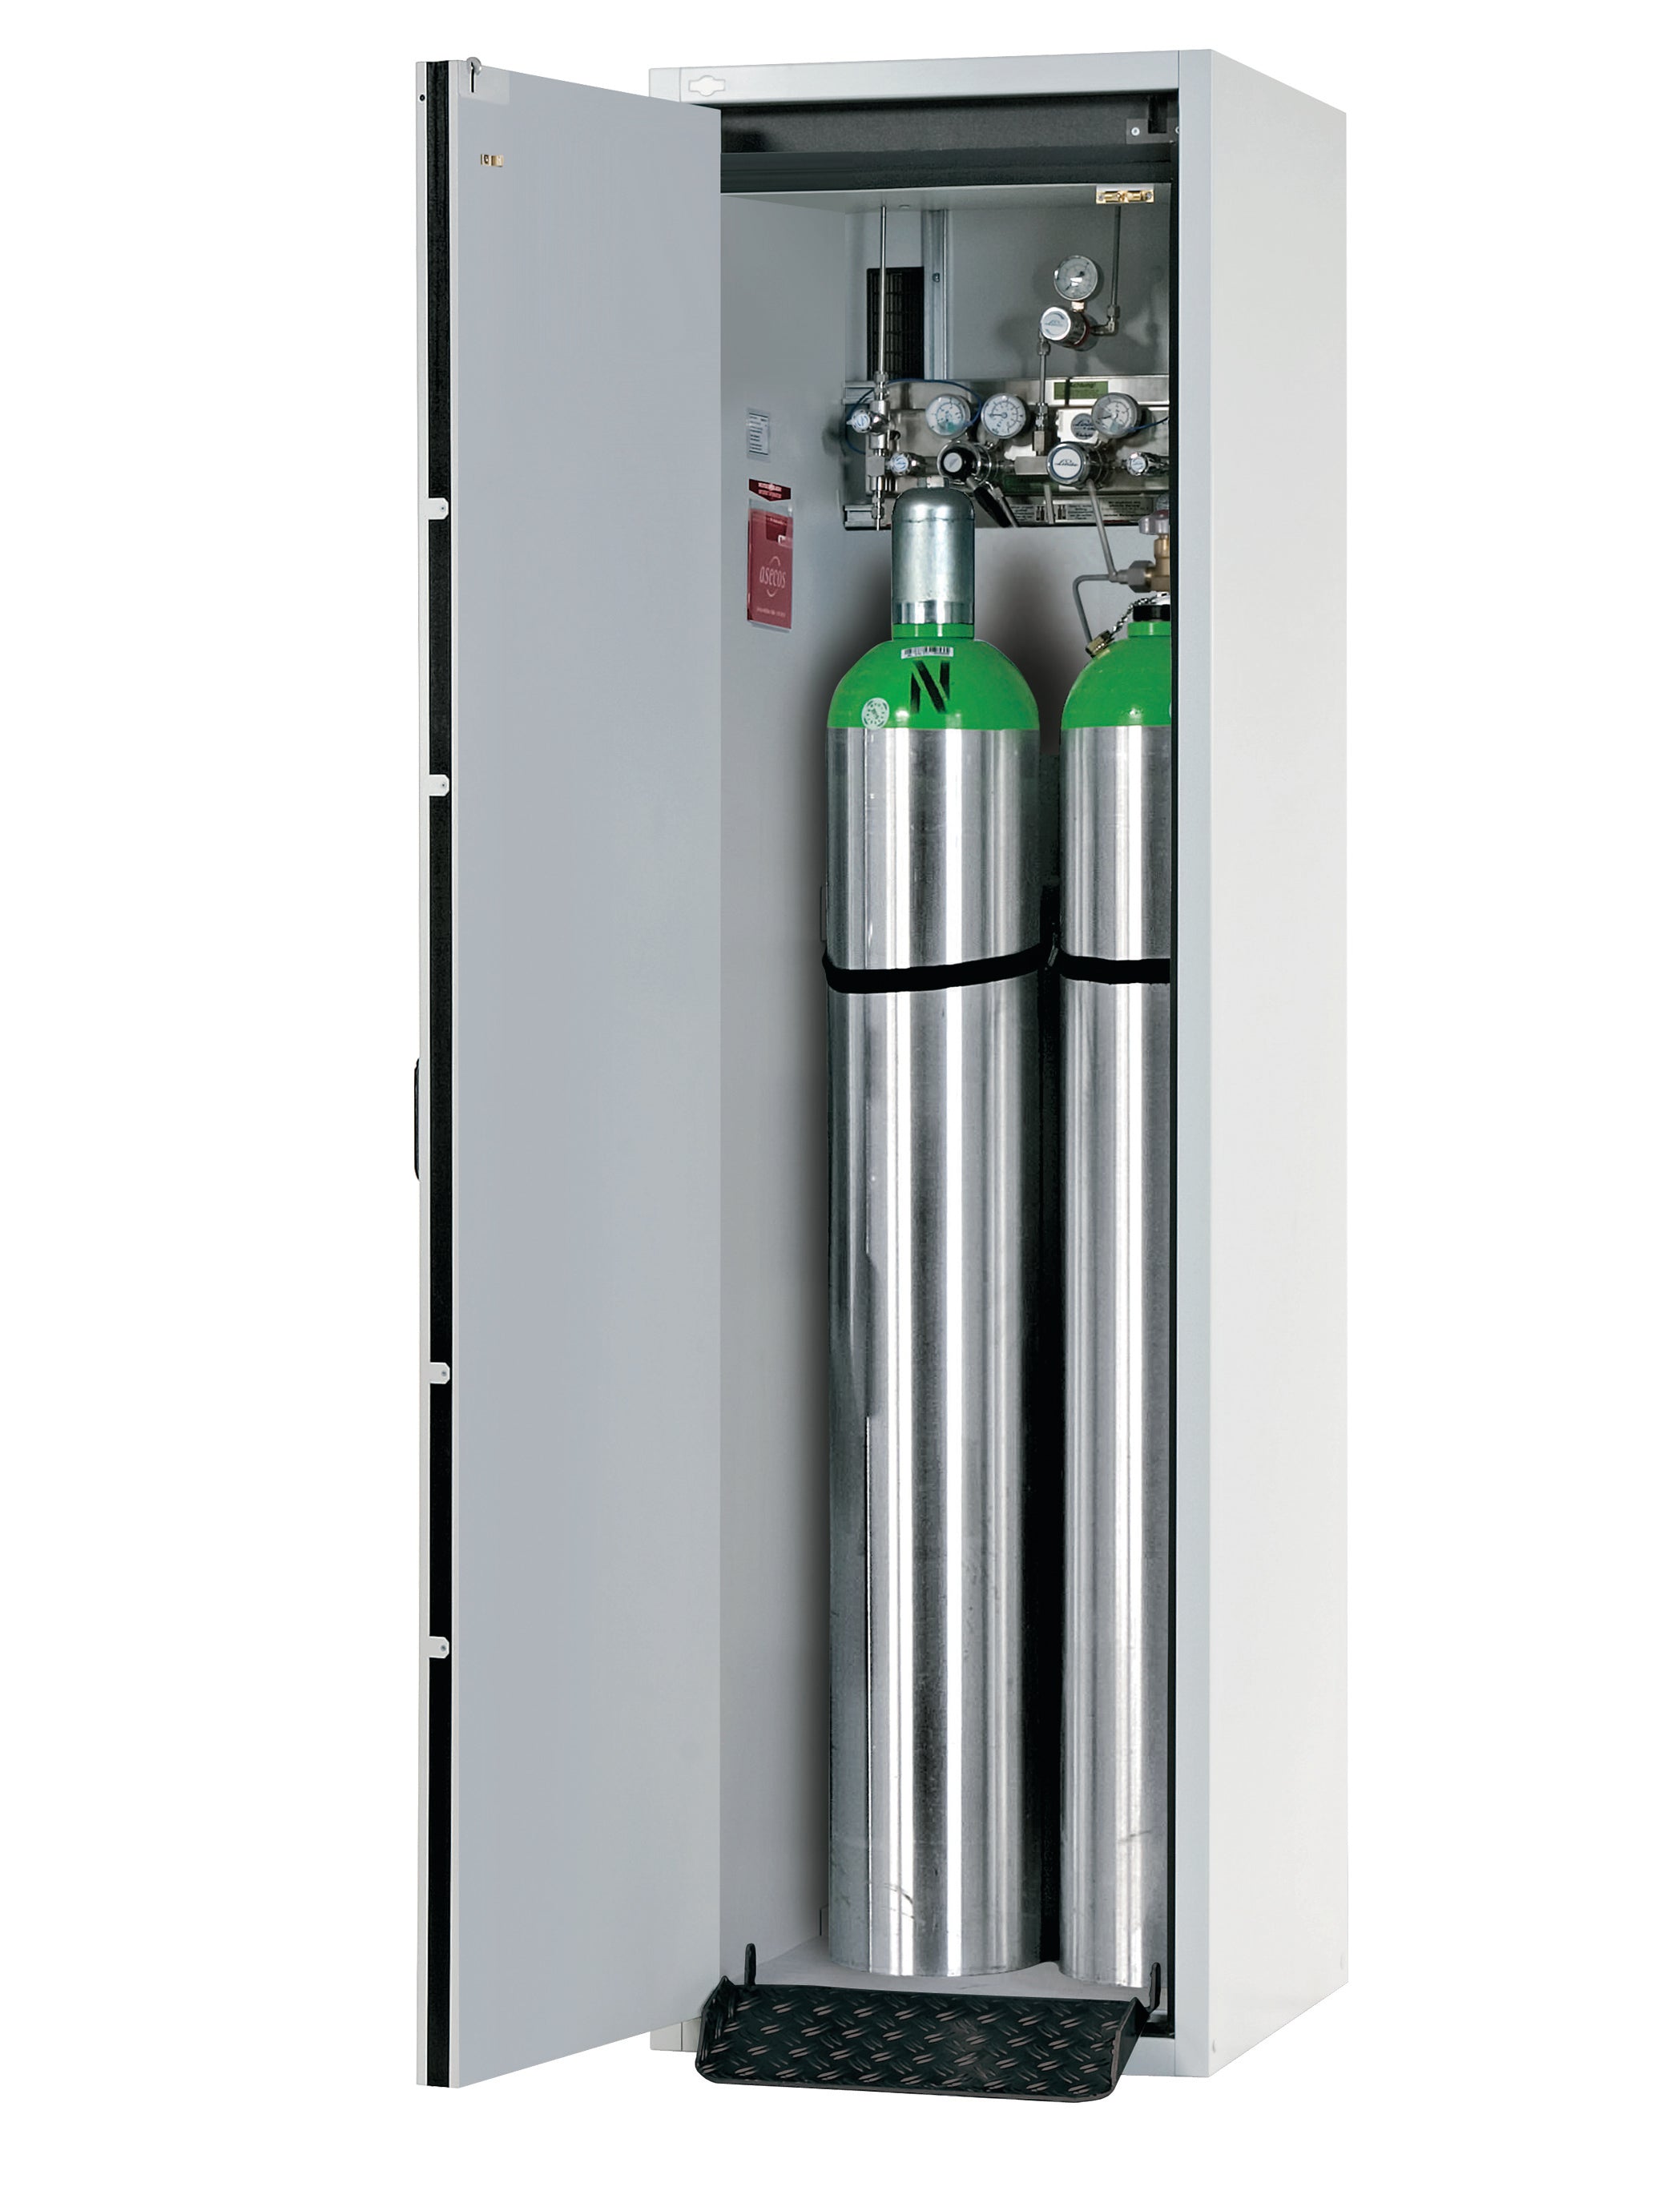 Type 30 compressed gas bottle cabinet G-CLASSIC-30 model G30.205.060 in light gray RAL 7035 with standard interior fittings for 2x compressed gas bottles of 50 liters each